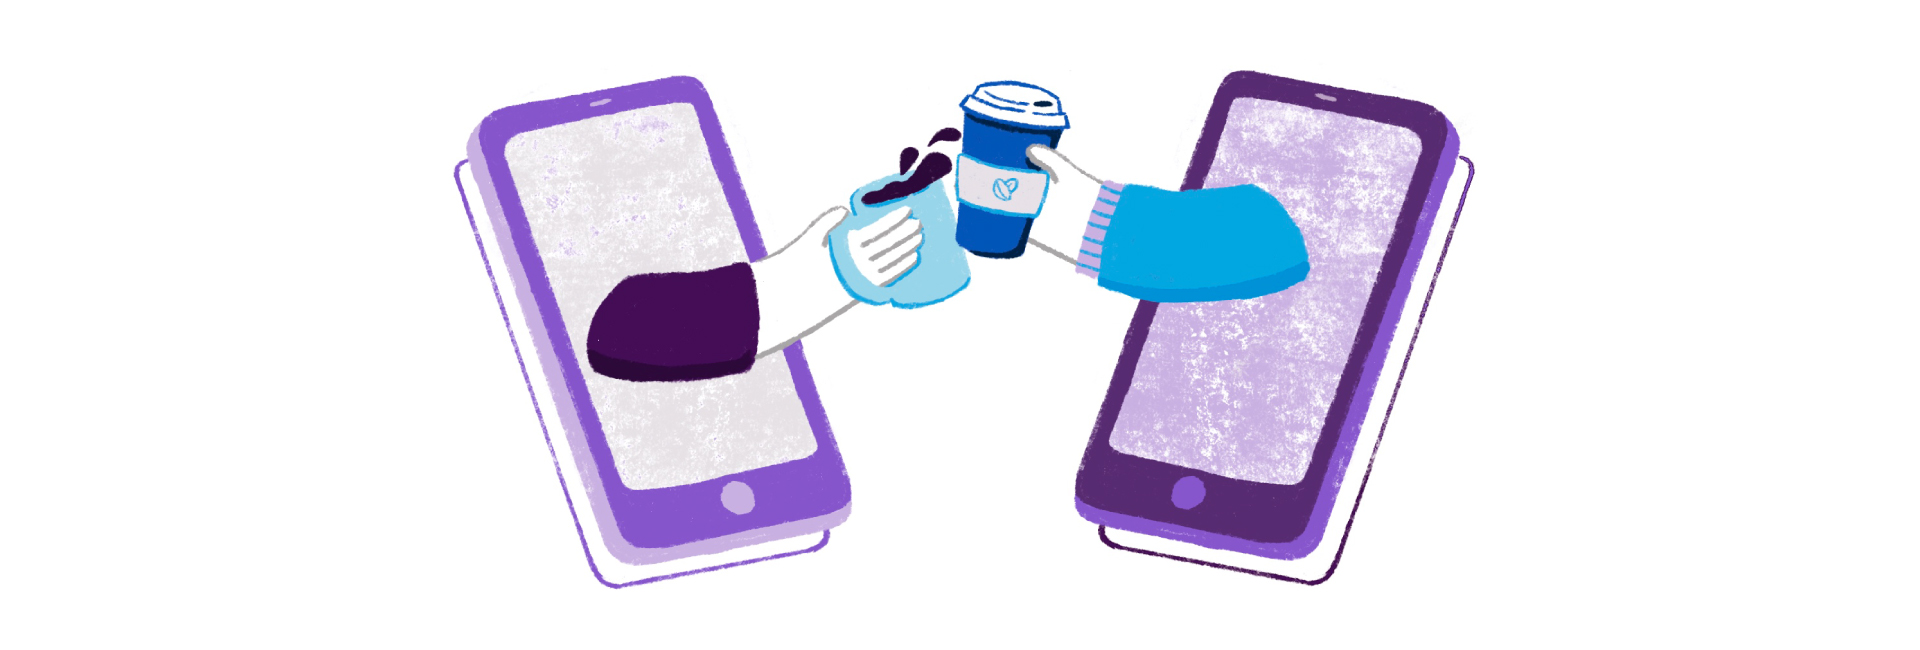 Illustration of arms reaching out of smartphones to clink coffees